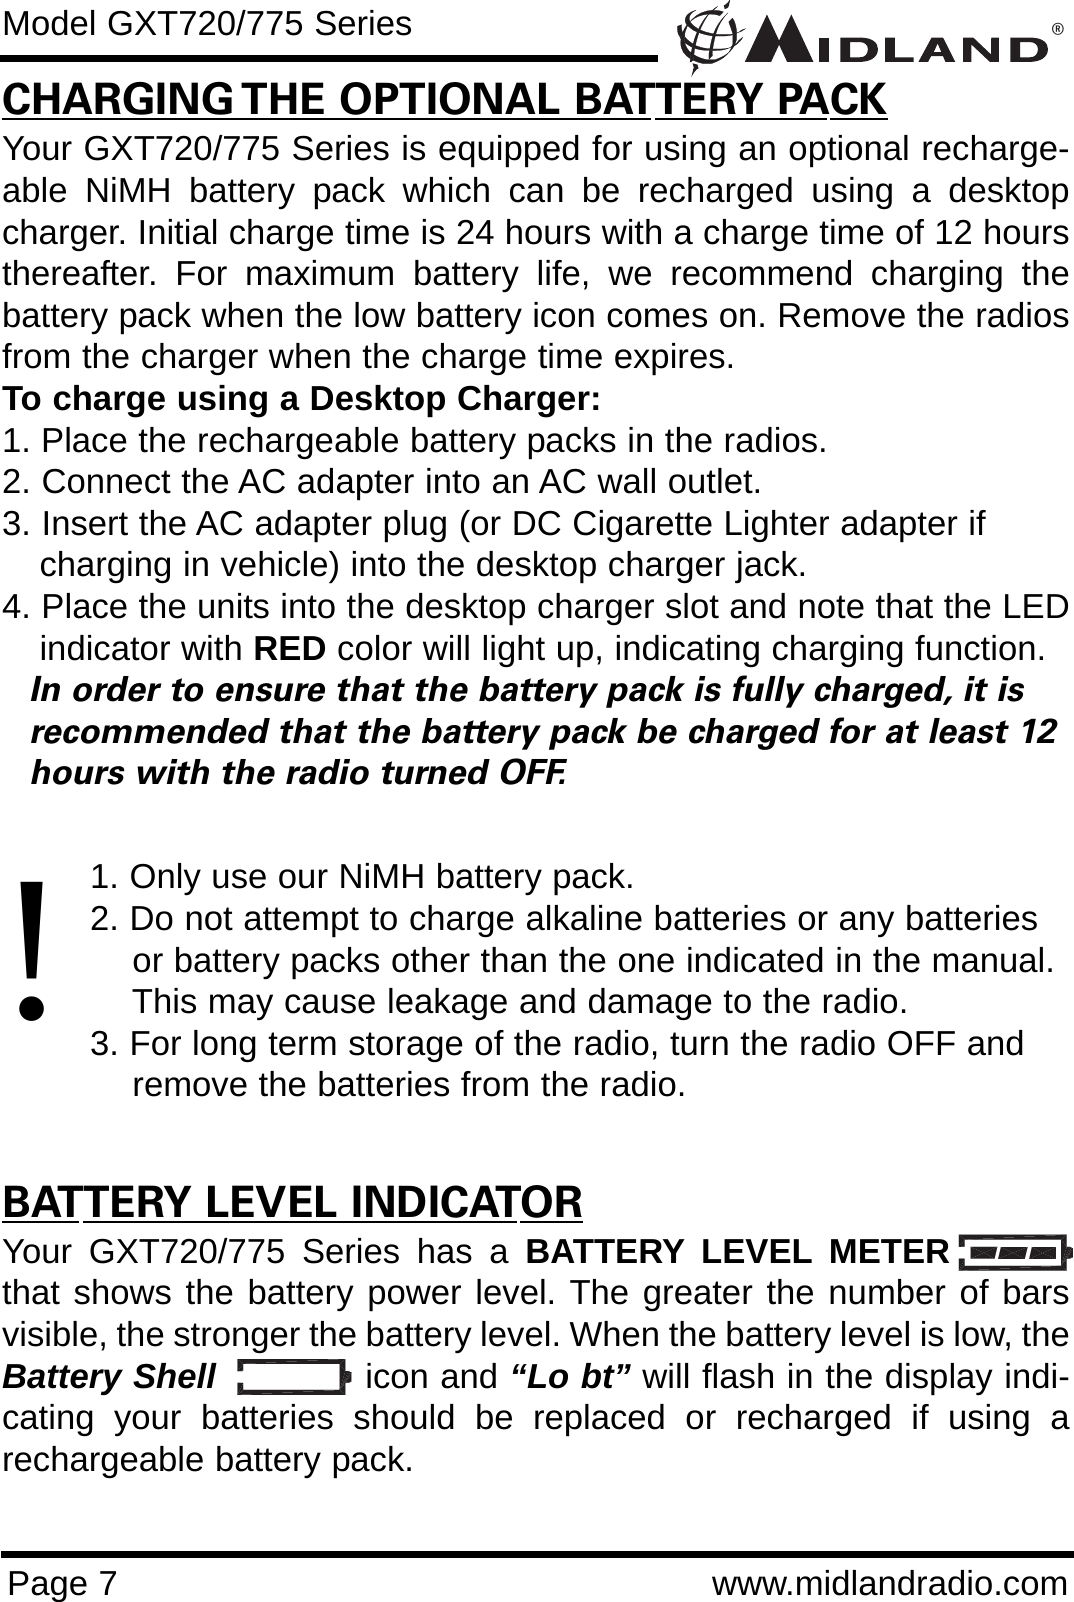 ®Page 7 www.midlandradio.comCHARGING THE OPTIONAL BATTERY PACKYour GXT720/775 Series is equipped for using an optional recharge-able NiMH battery pack which can be recharged using a desktopcharger. Initial charge time is 24 hours with a charge time of 12 hoursthereafter. For maximum battery life, we recommend charging thebattery pack when the low battery icon comes on. Remove the radiosfrom the charger when the charge time expires.To charge using a Desktop Charger:1. Place the rechargeable battery packs in the radios.2. Connect the AC adapter into an AC wall outlet.3. Insert the AC adapter plug (or DC Cigarette Lighter adapter if    charging in vehicle) into the desktop charger jack.4. Place the units into the desktop charger slot and note that the LEDindicator with RED color will light up, indicating charging function. In order to ensure that the battery pack is fully charged, it is  recommended that the battery pack be charged for at least 12 hours with the radio turned OFF.1. Only use our NiMH battery pack.2. Do not attempt to charge alkaline batteries or any batteries or battery packs other than the one indicated in the manual. This may cause leakage and damage to the radio.3. For long term storage of the radio, turn the radio OFF and remove the batteries from the radio.BATTERY LEVEL INDICATORYour GXT720/775 Series has a BATTERY LEVEL METERthat shows the battery power level. The greater the number of barsvisible, the stronger the battery level. When the battery level is low, theBattery Shell icon and “Lo bt” will flash in the display indi-cating your batteries should be replaced or recharged if using arechargeable battery pack.Model GXT720/775 Series!